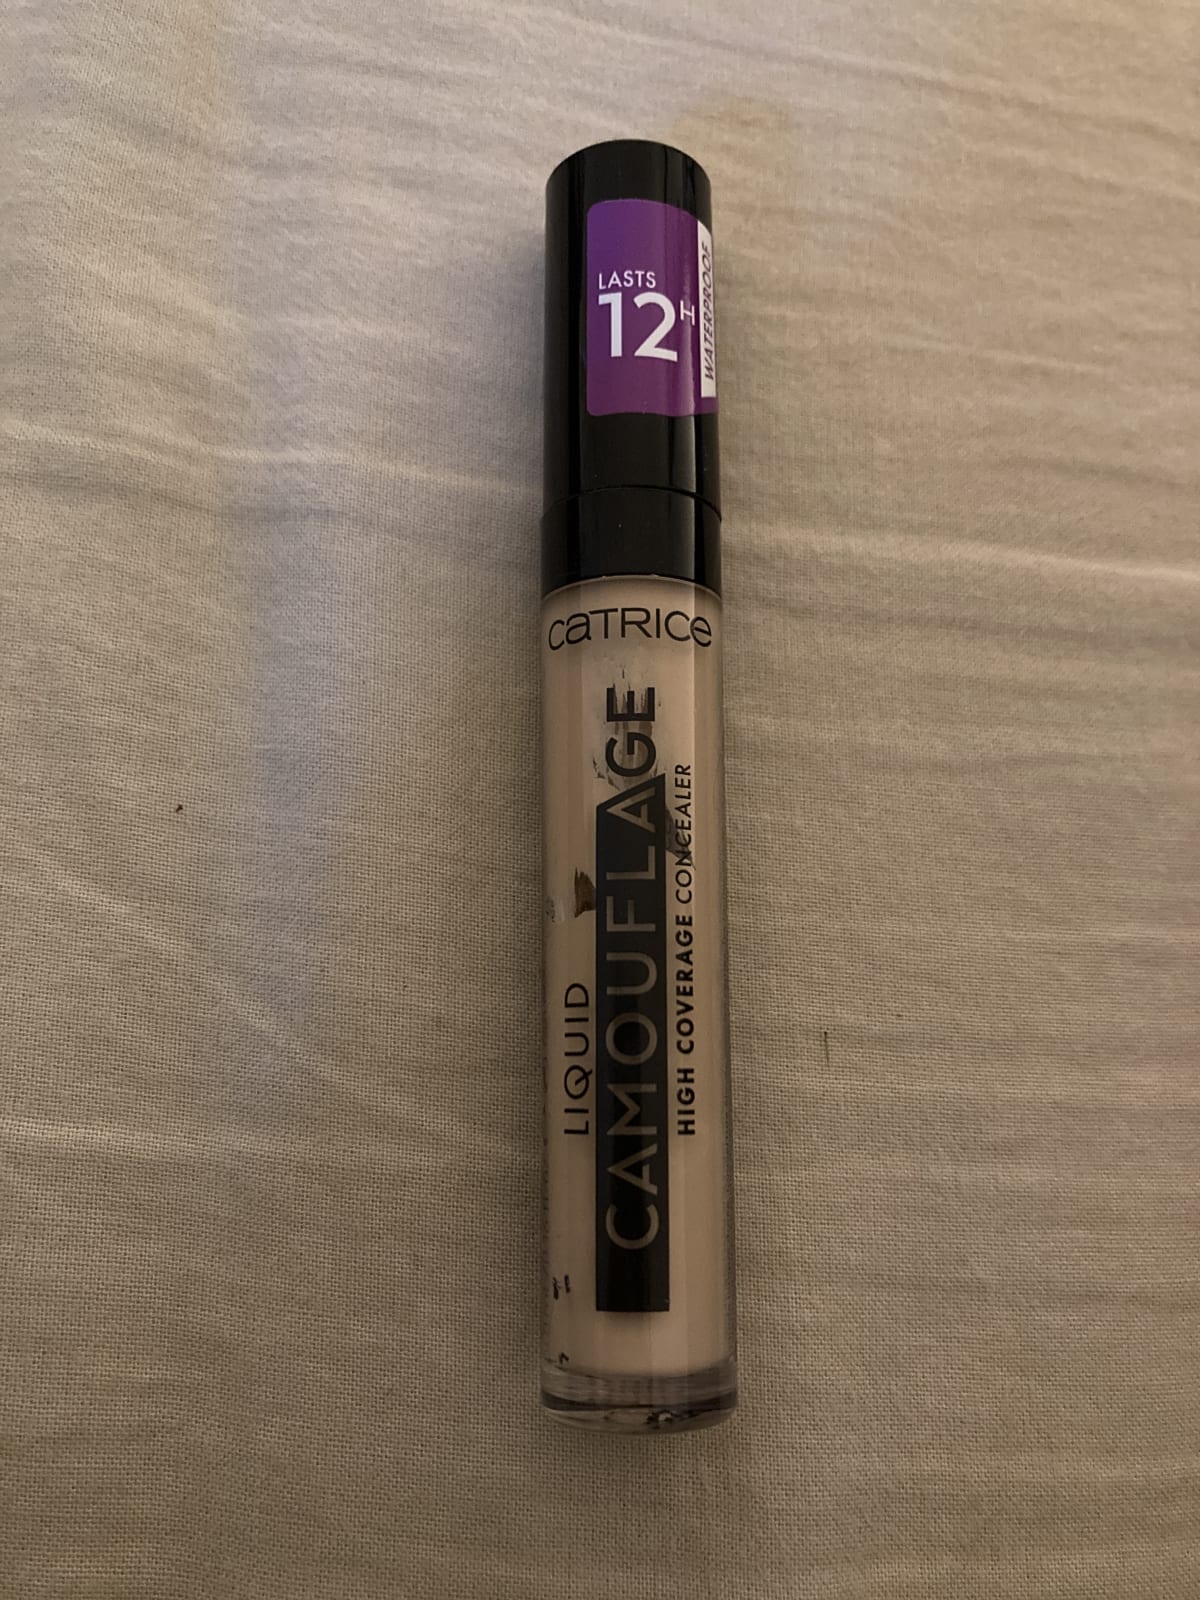 Catrice Liquid Camouflage High Coverage Concealer 005 Light Natural - review image